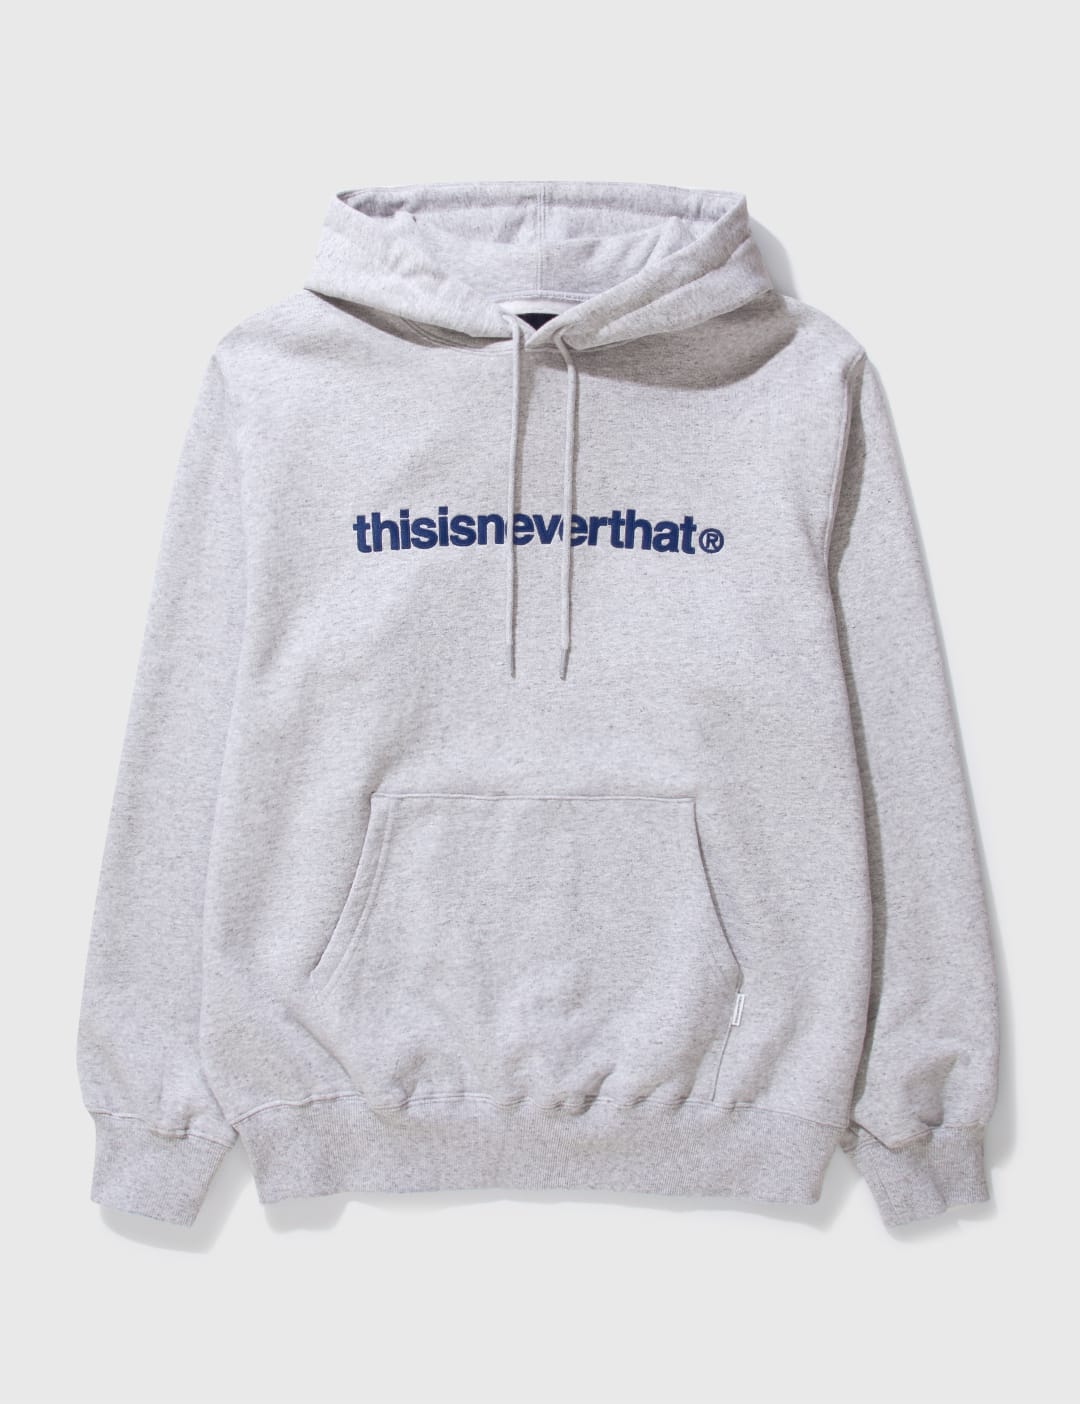 thisisneverthat® - T Logo Hoodie | HBX - Globally Curated Fashion 